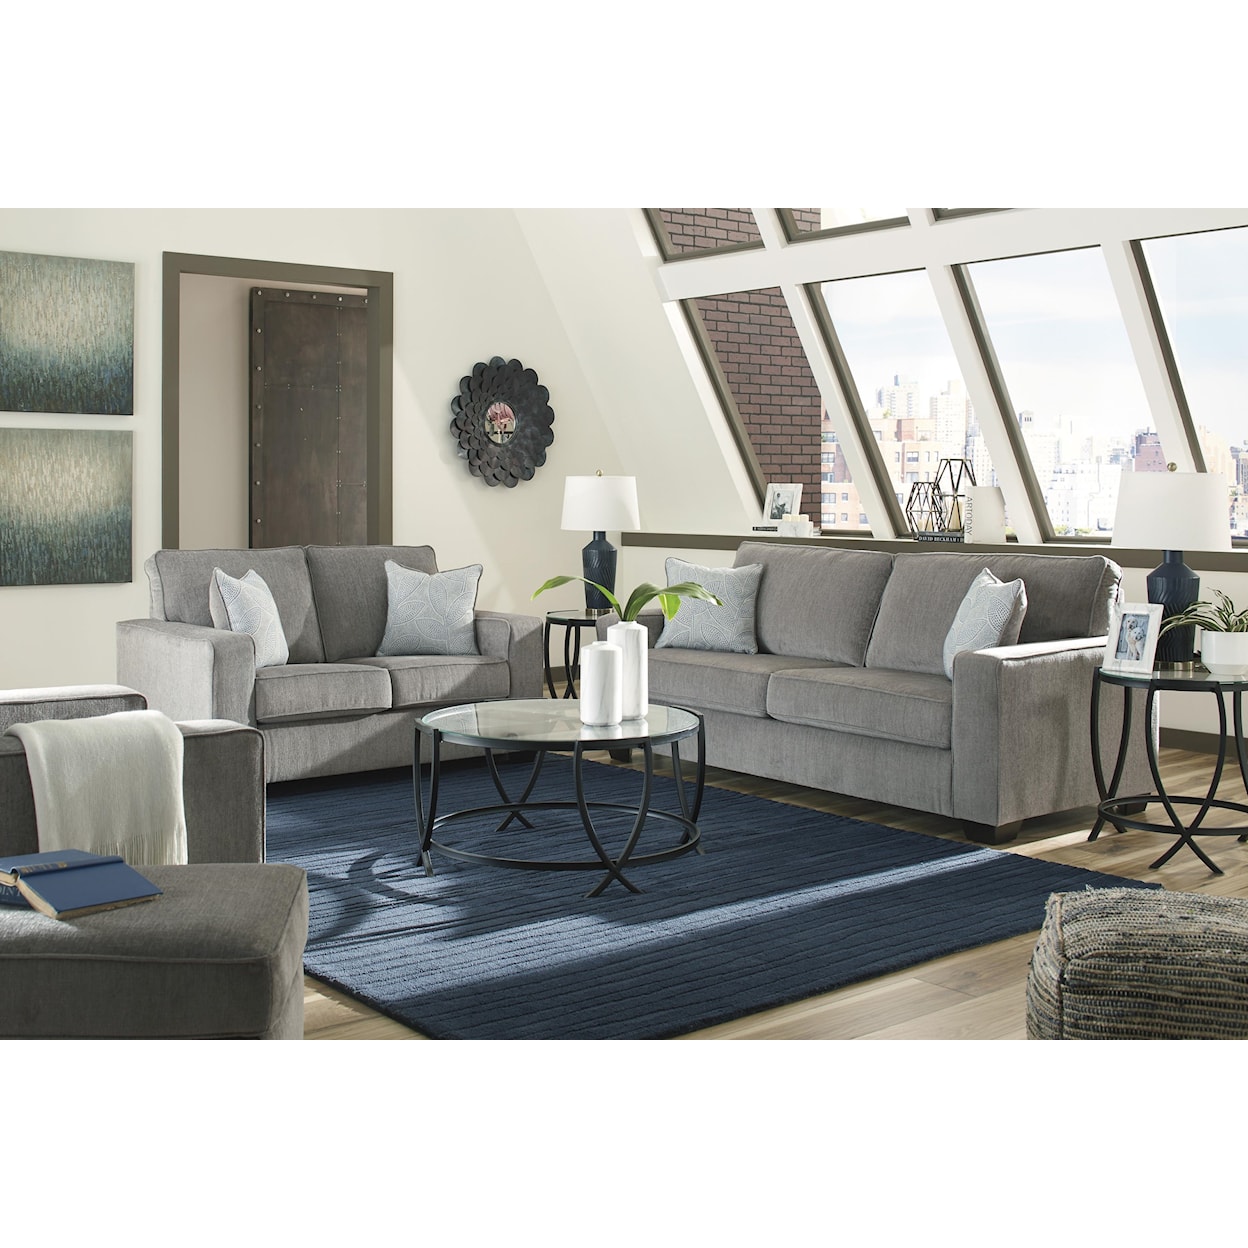 Signature Design by Ashley Altari Sofa, Loveseat and Chair Set